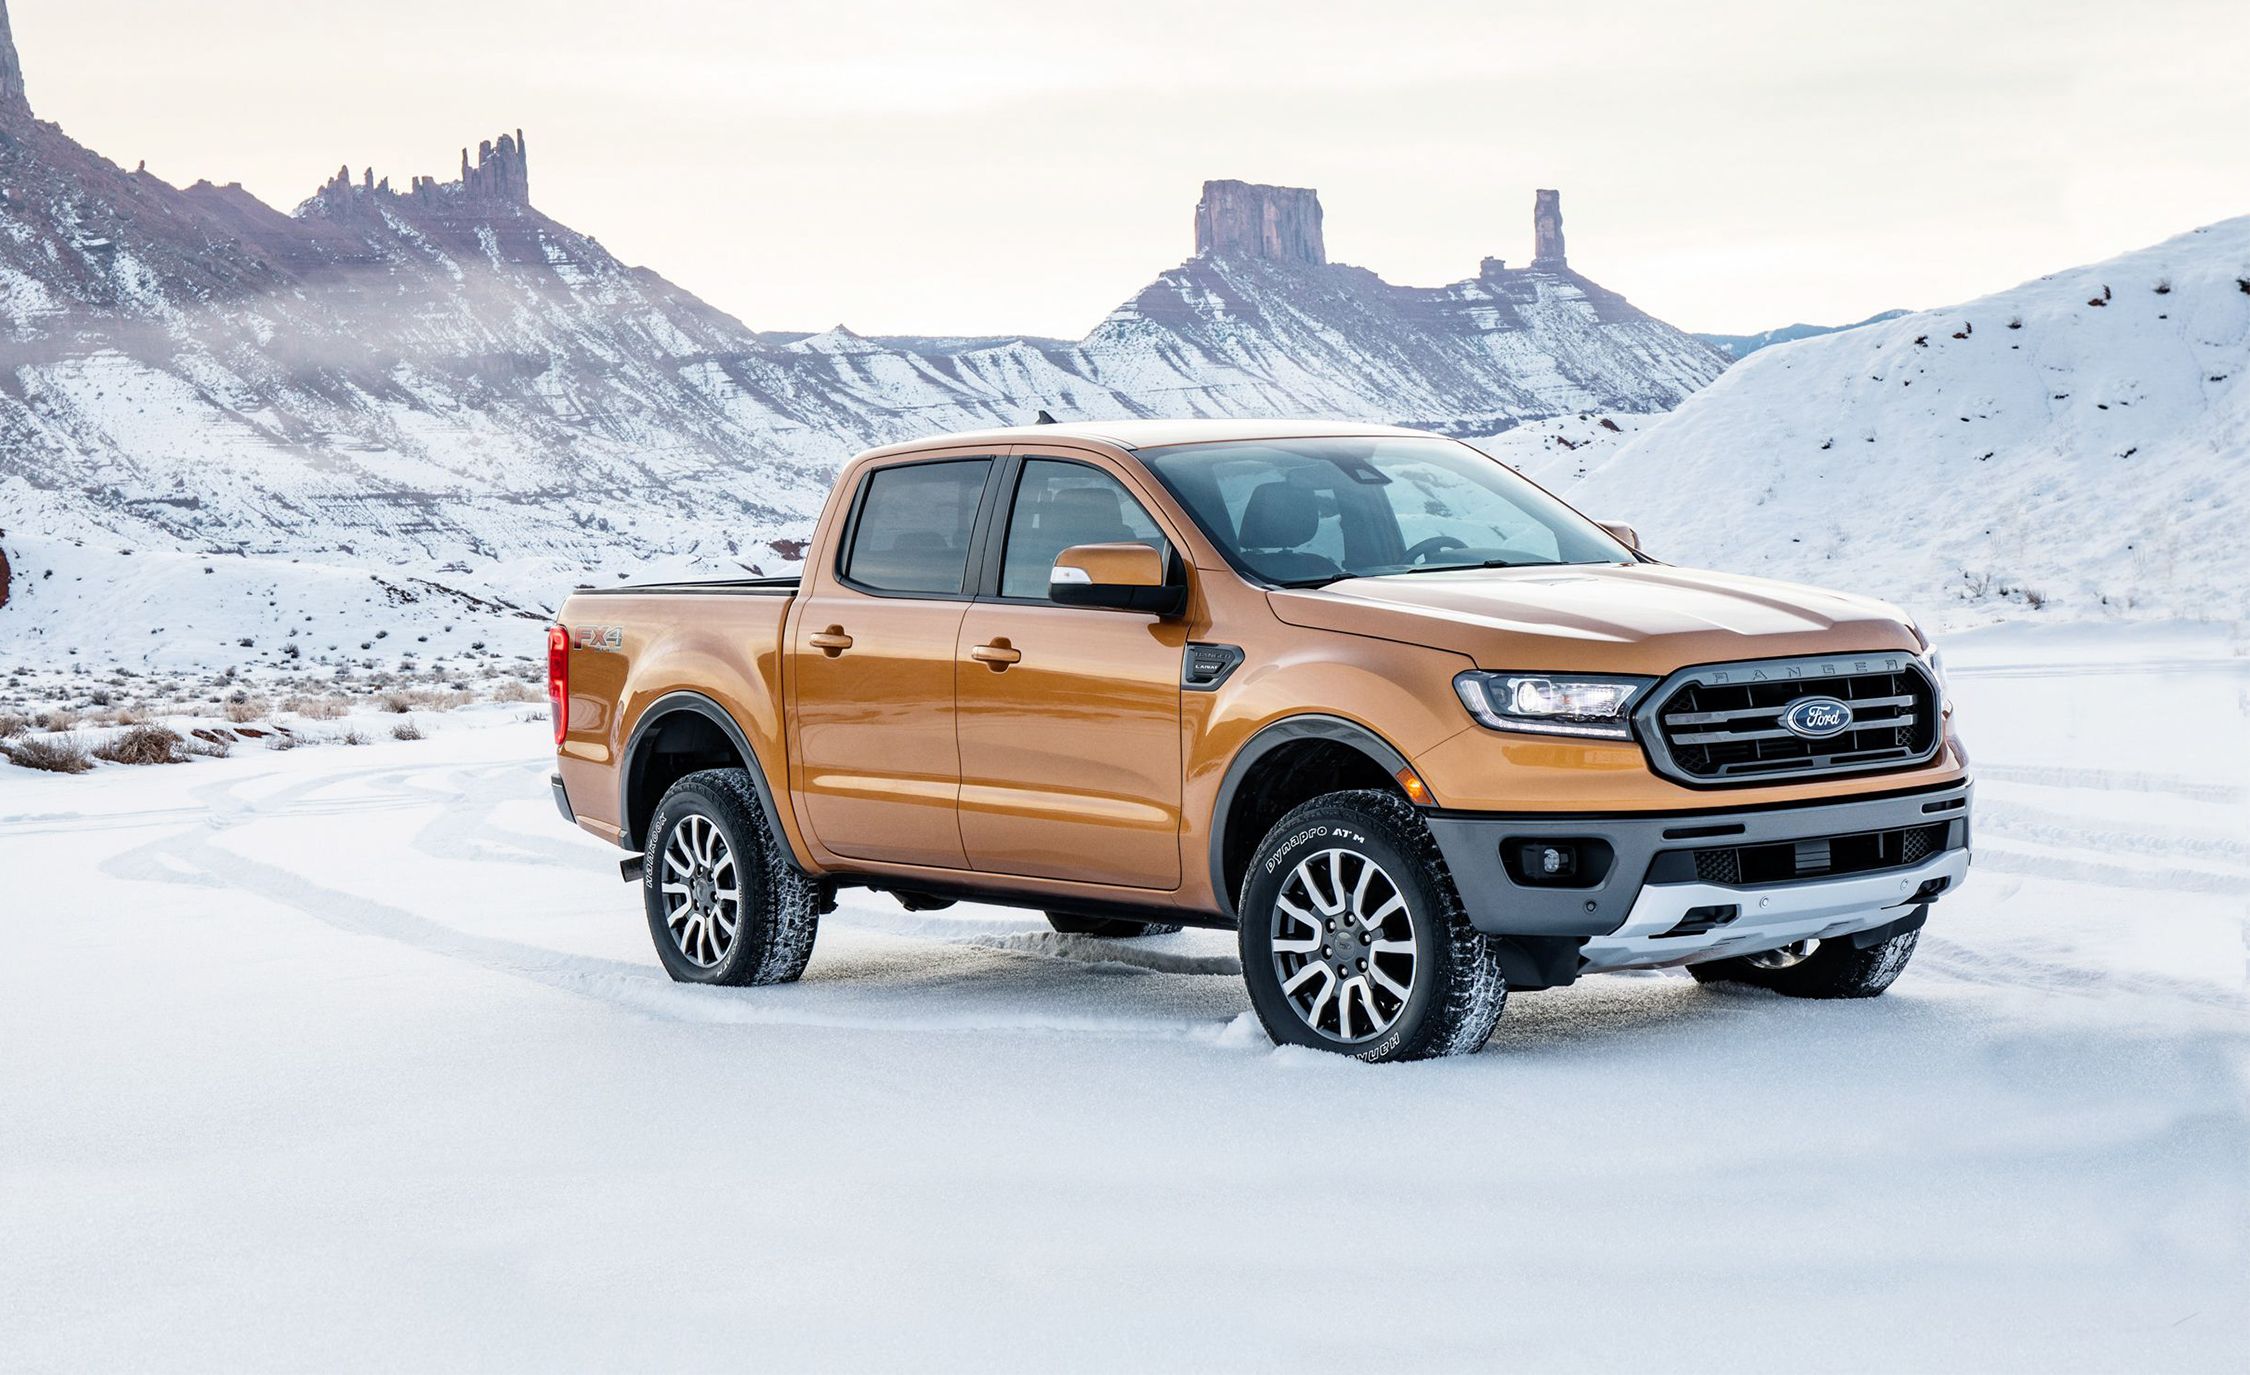 2019 Ford Ranger Pricing Announced, Truck Configurator Goes Live